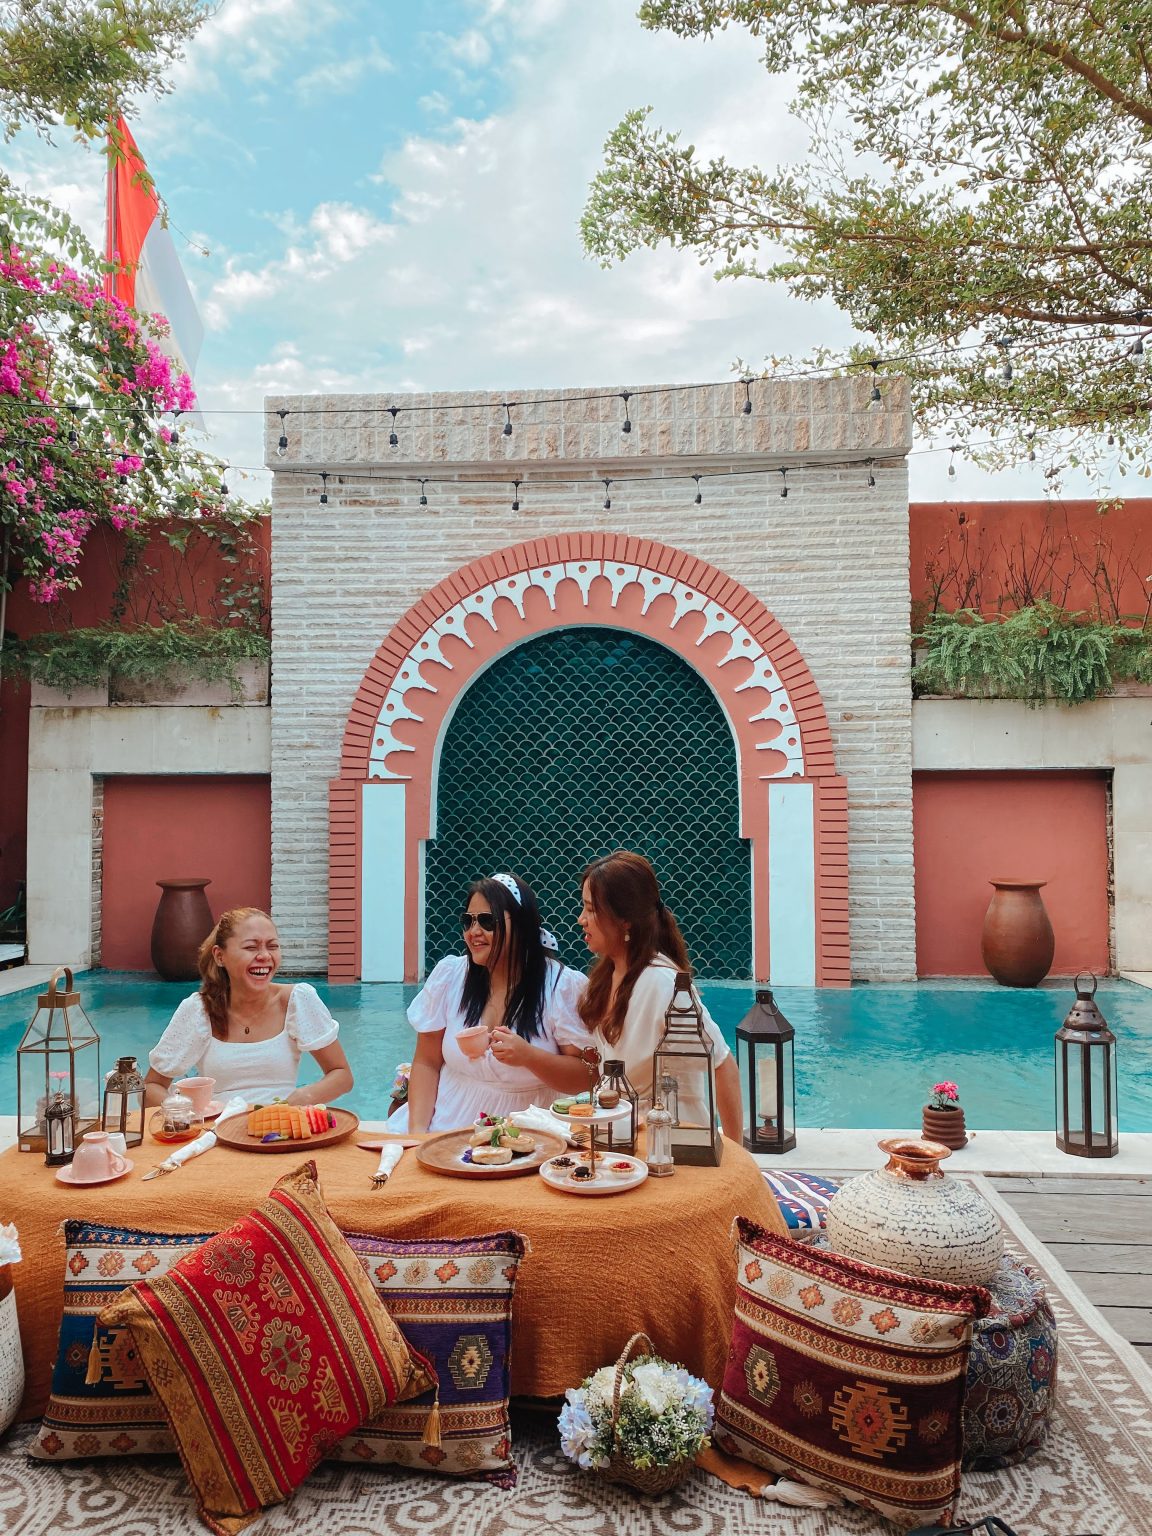 Este Leisure: Afternoon Tea in Bali with Moroccan Vibe!